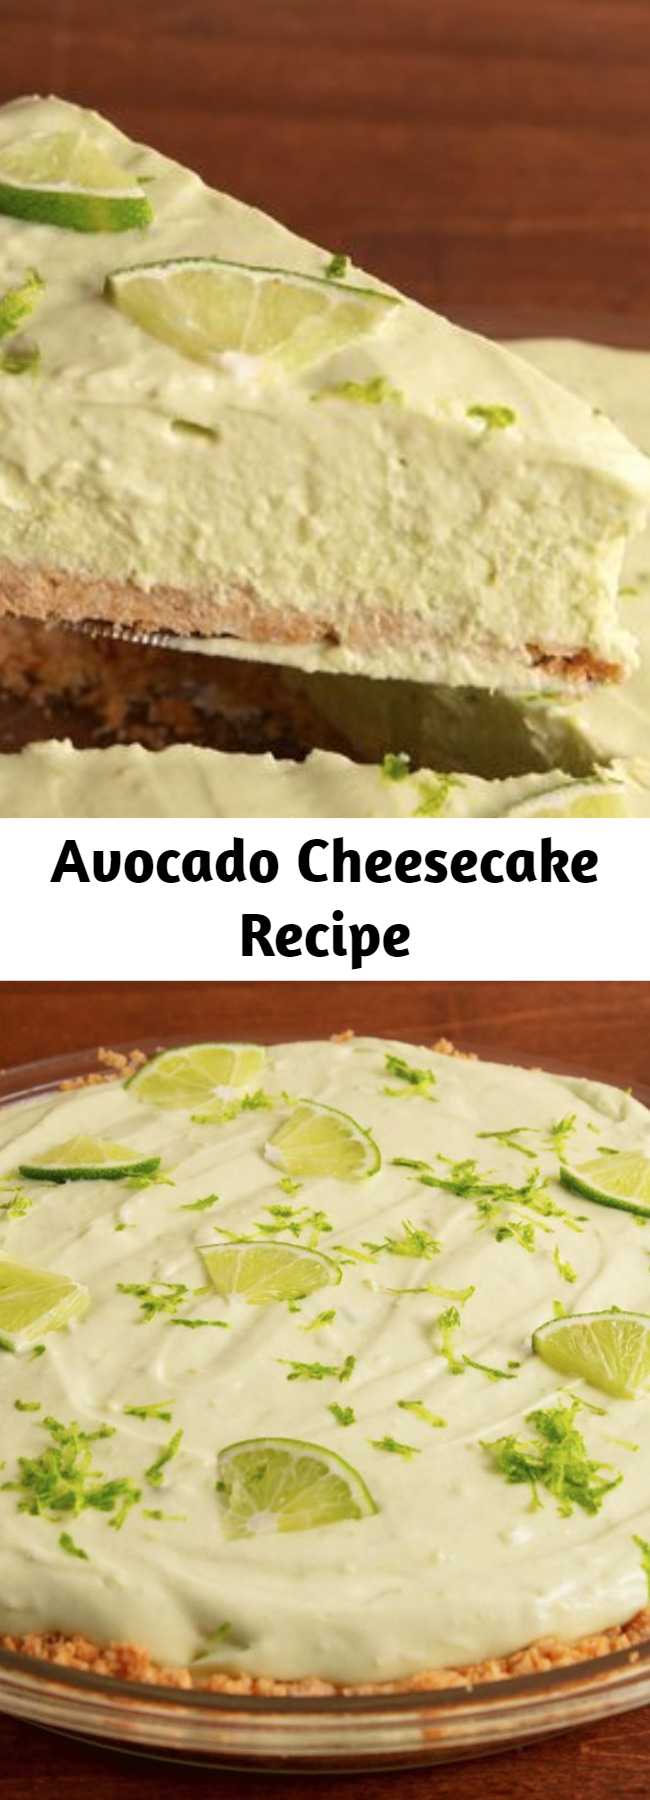 Avocado Cheesecake Recipe - Check out this unique recipe for avocado cheesecake, it's shockingly good! Perfect for the avocado obsessed.